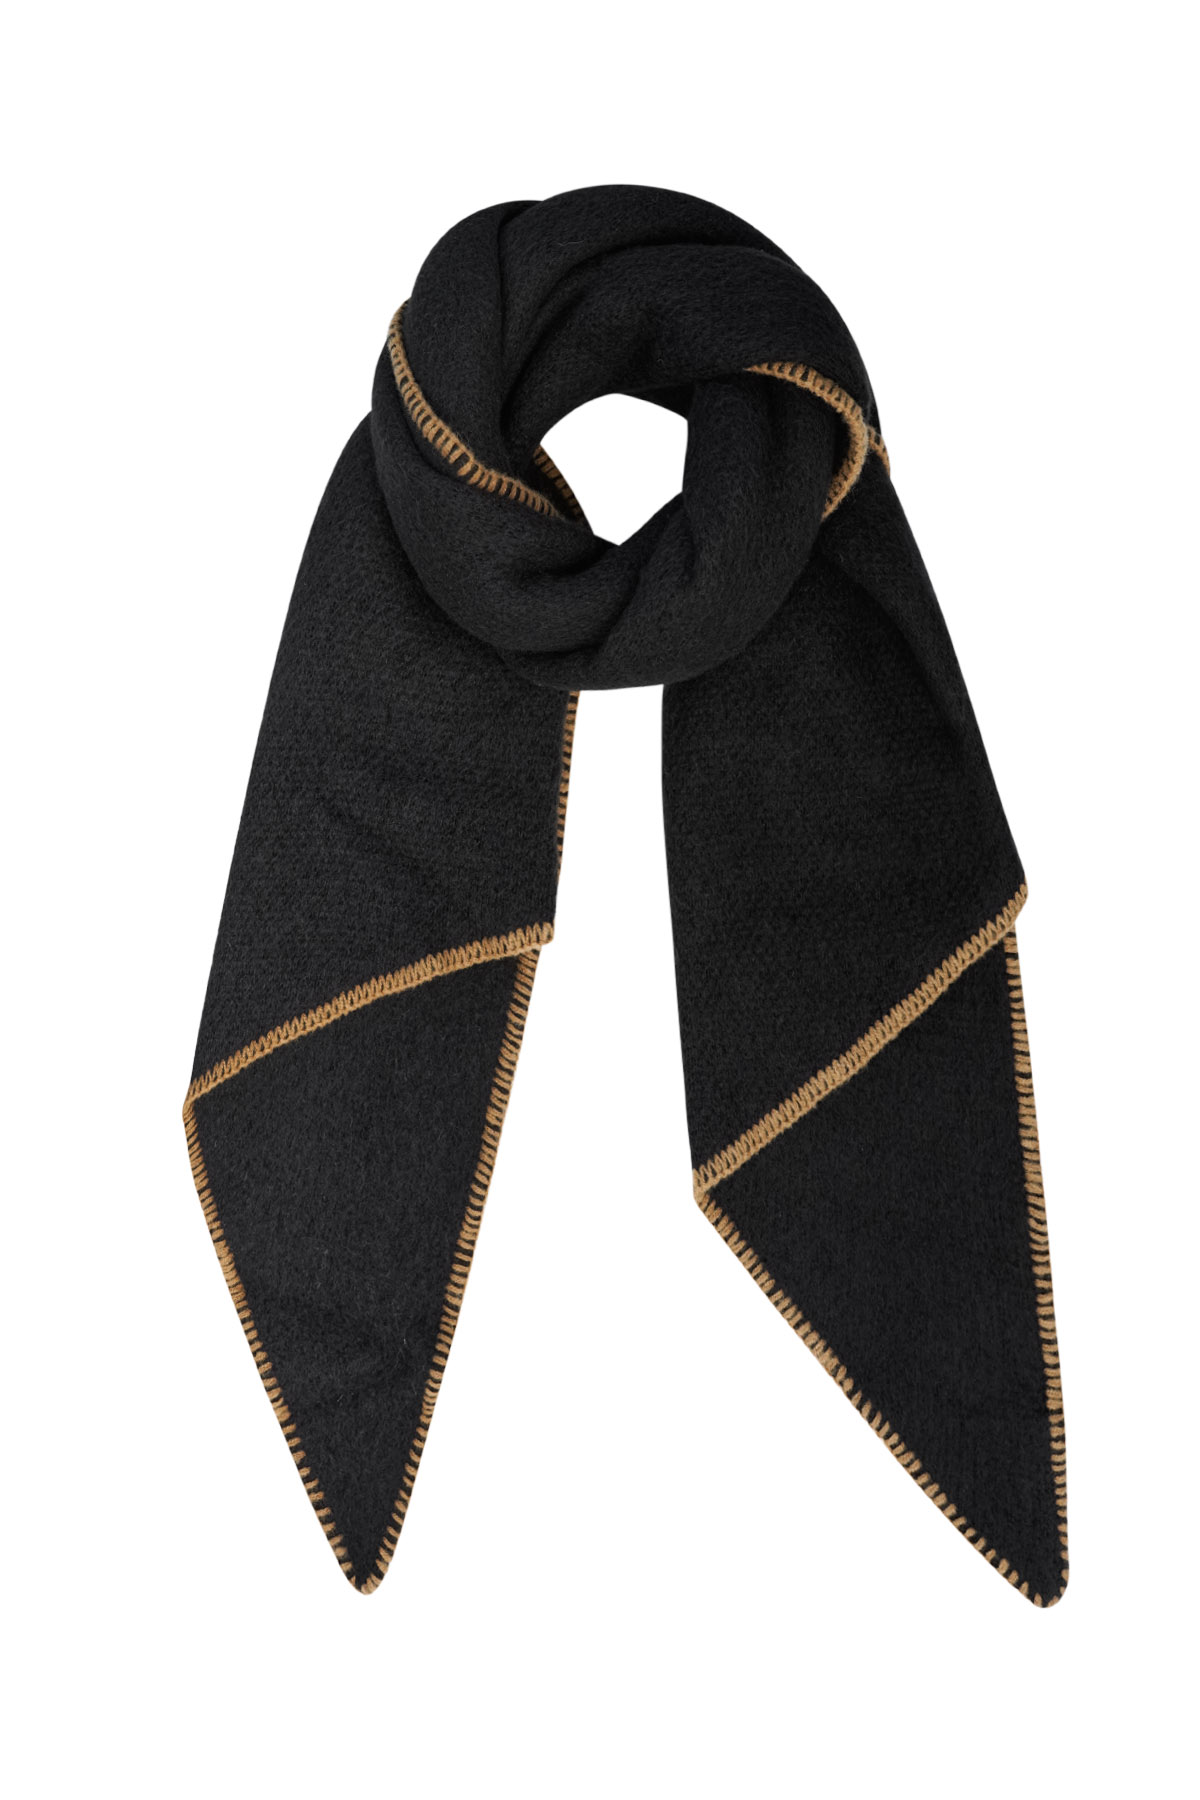 Winter scarf one-color with black stitching - black